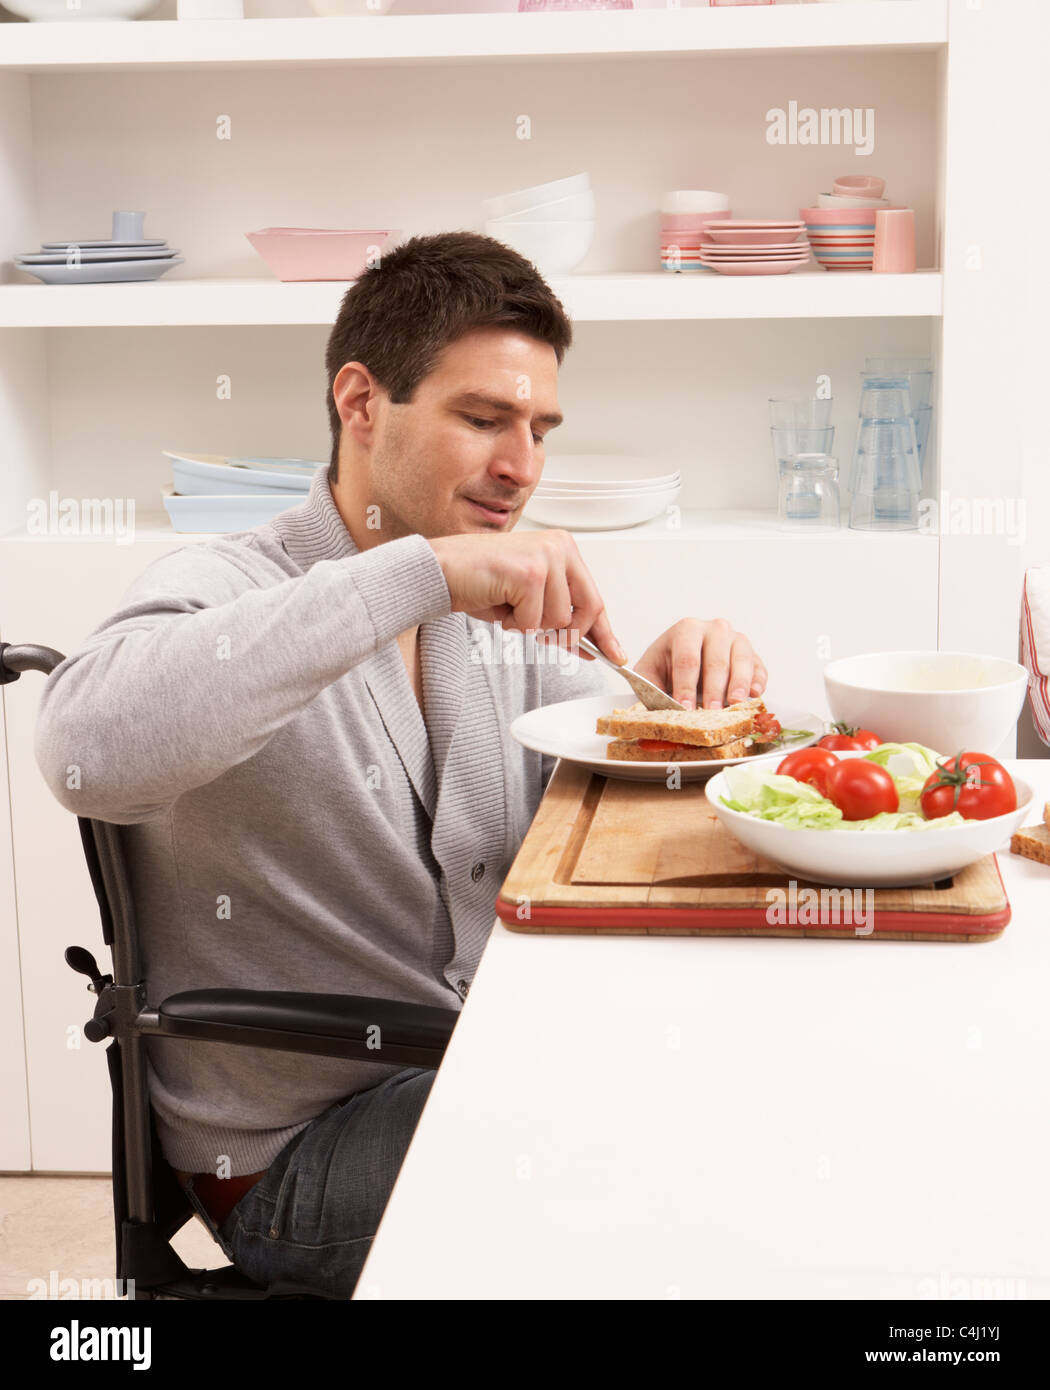 Disabled Man Making Sandwich In Kitchen Stock Photo